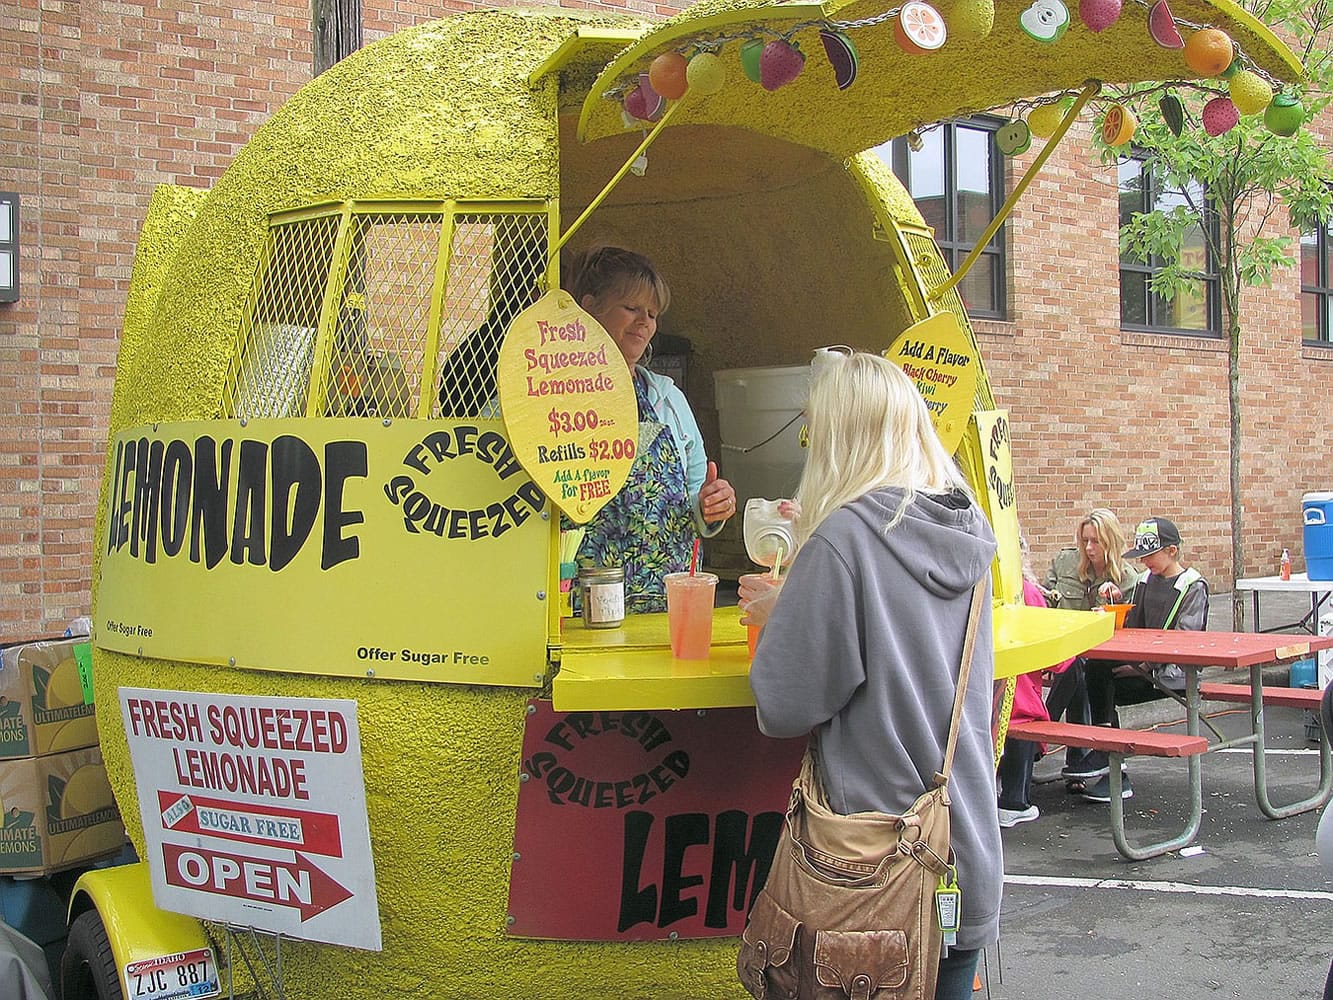 The Fresh Squeezed Lemonade stand was a popular spot for thirsty Camas Days attendees.